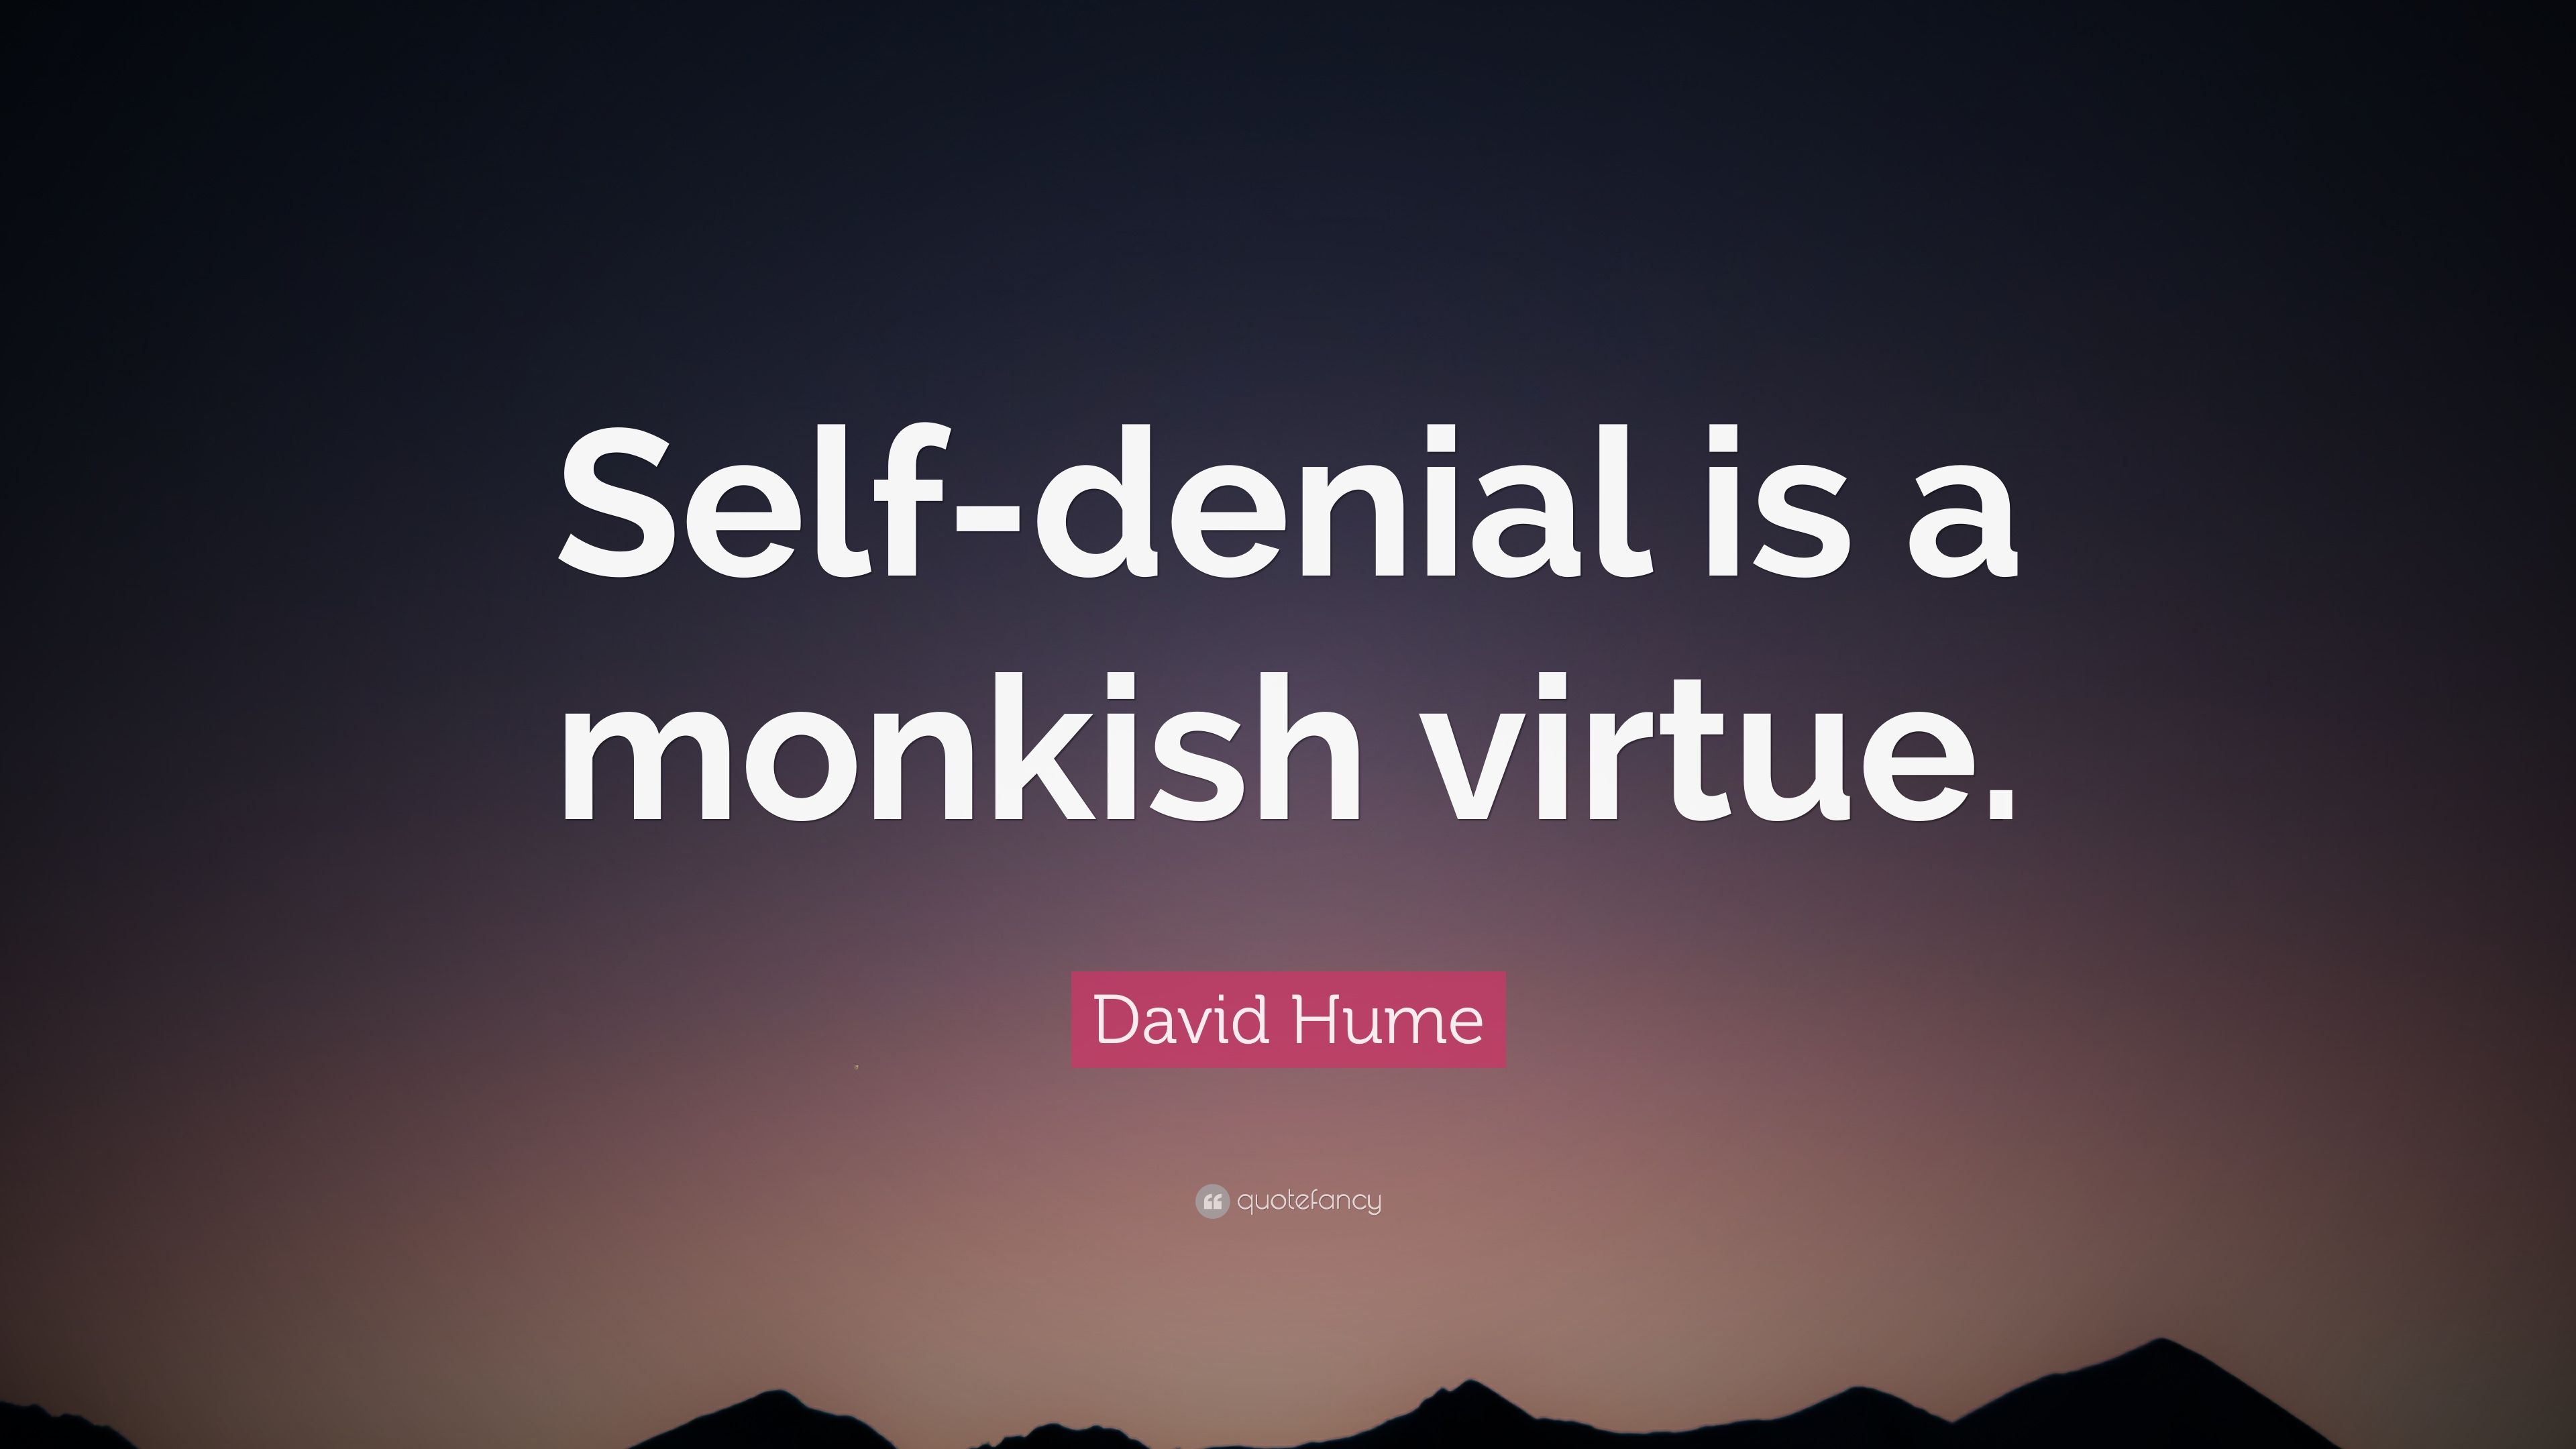 David Hume Quote: “Self Denial Is A Monkish Virtue.” (7 Wallpaper)